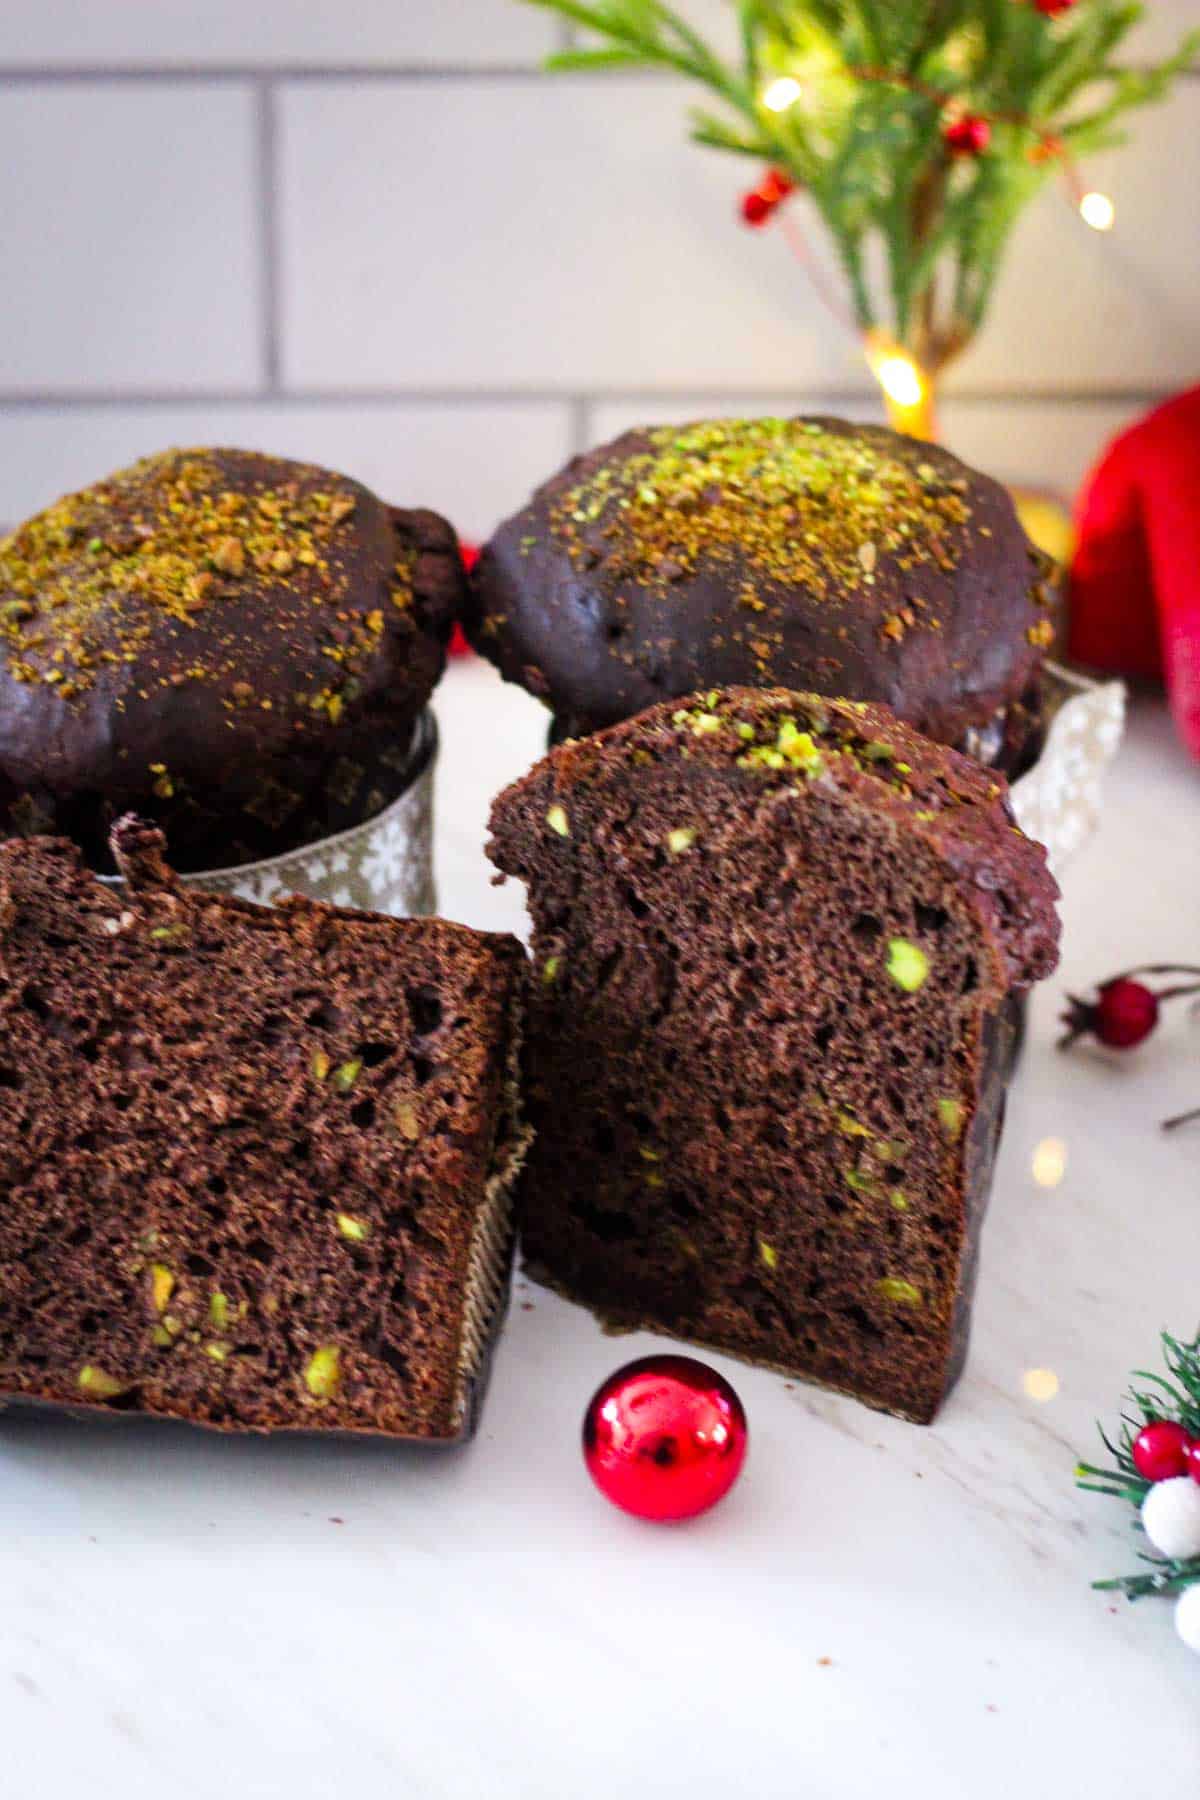 Baked mini panettones with chocolate and pistachios. One is panettone is front and center and cut in half so you can see the inside.